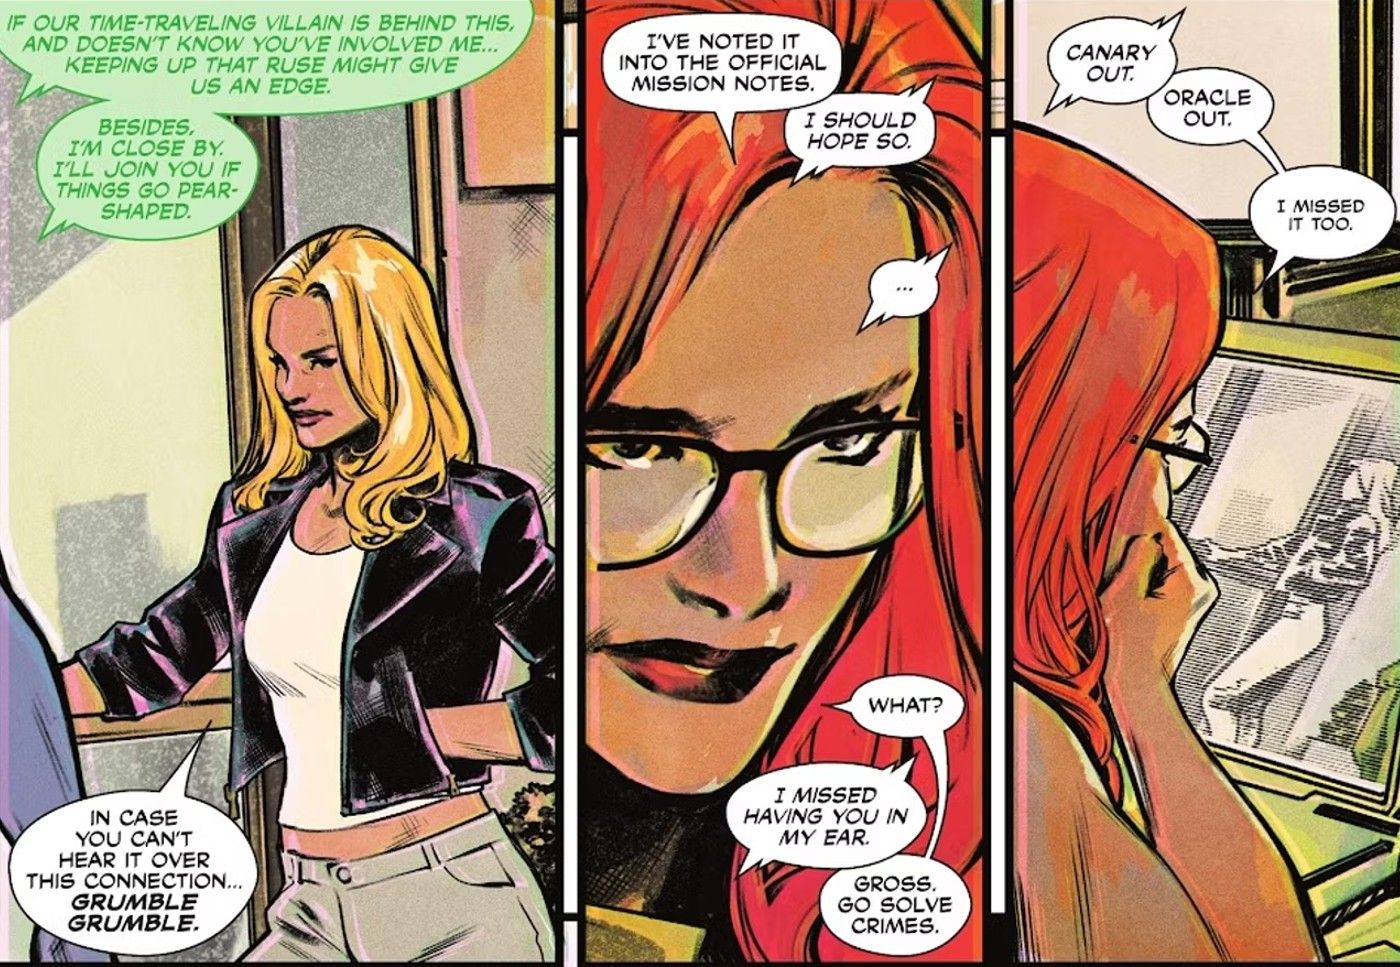 Comic book panels: Black Canary and Oracle banter over comms.